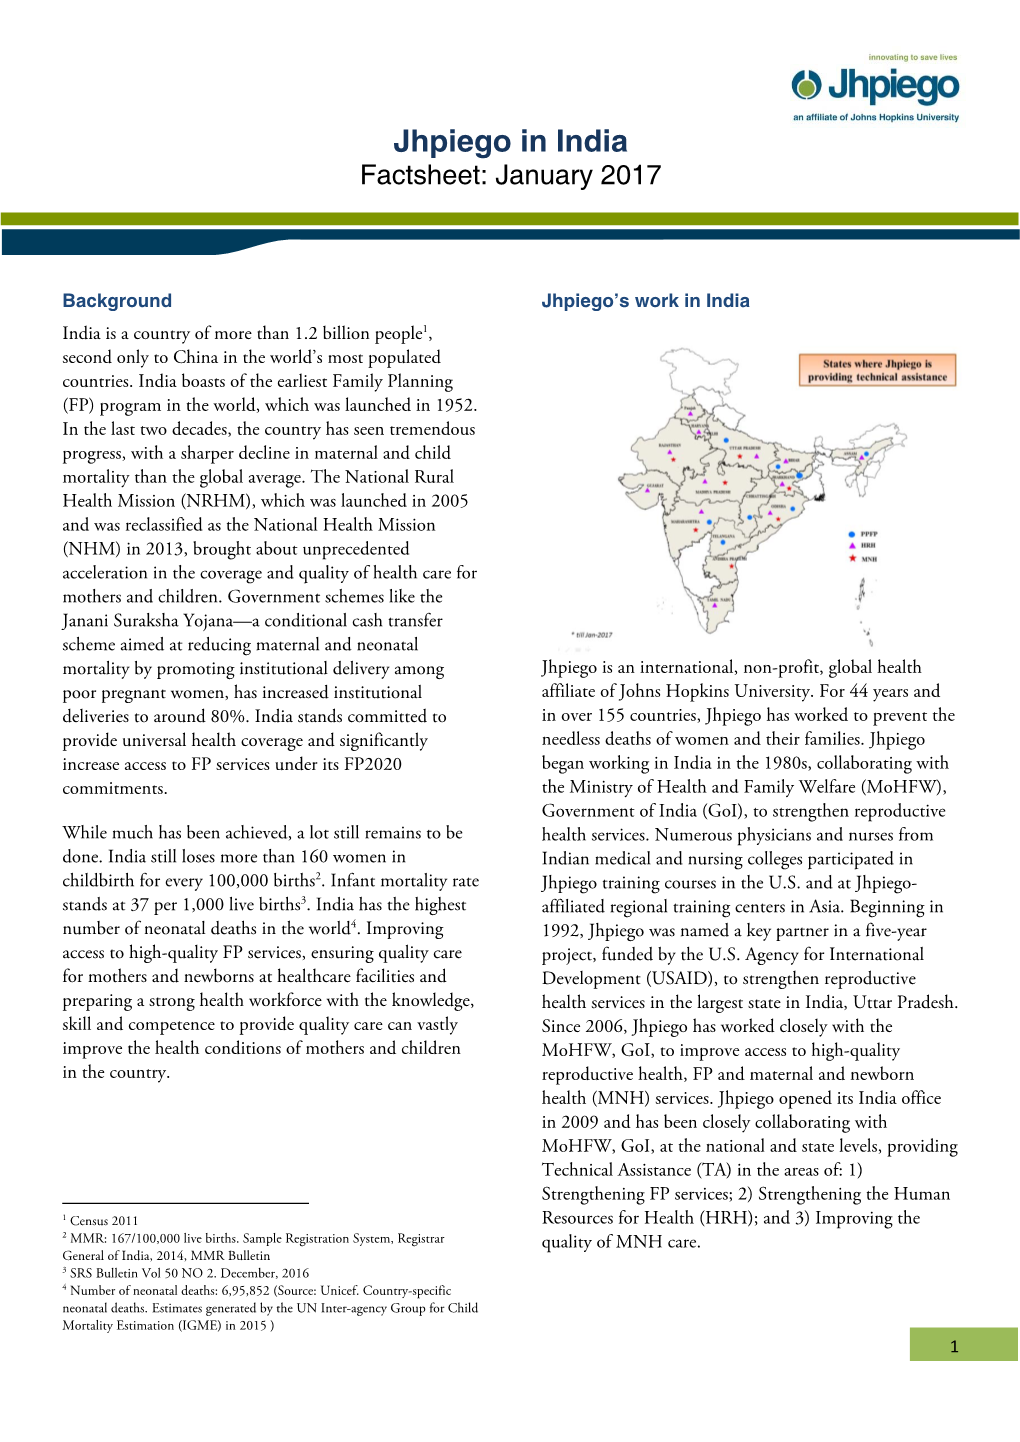 Jhpiego in India Factsheet: January 2017